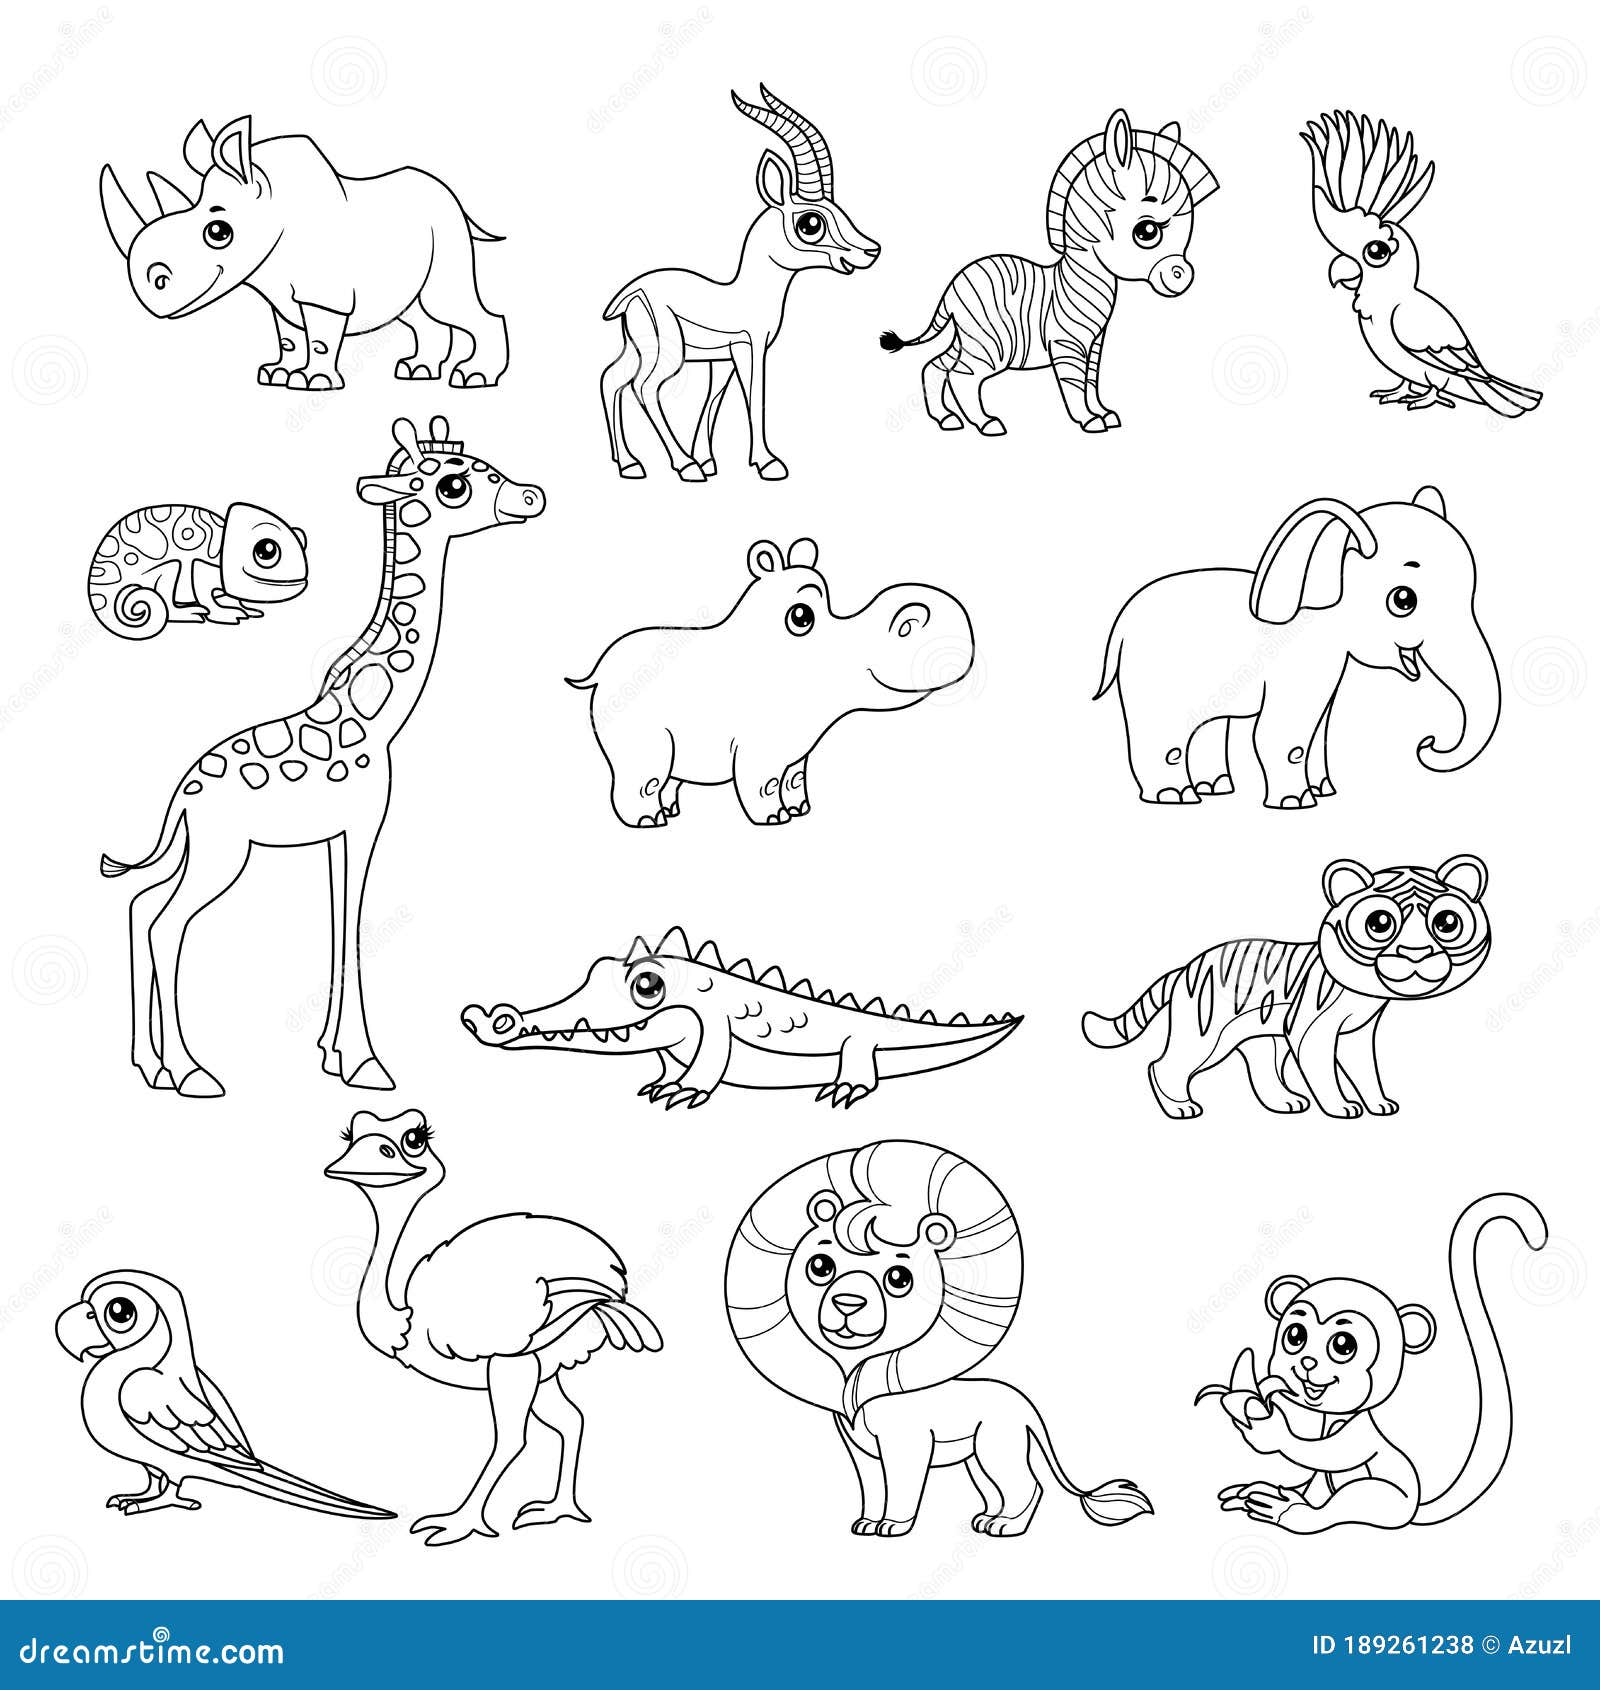 Cute Cartoon Various African Animals Set Black Doodles Outline on a White  Background for Coloring Page Stock Vector - Illustration of line, hippo:  189261238